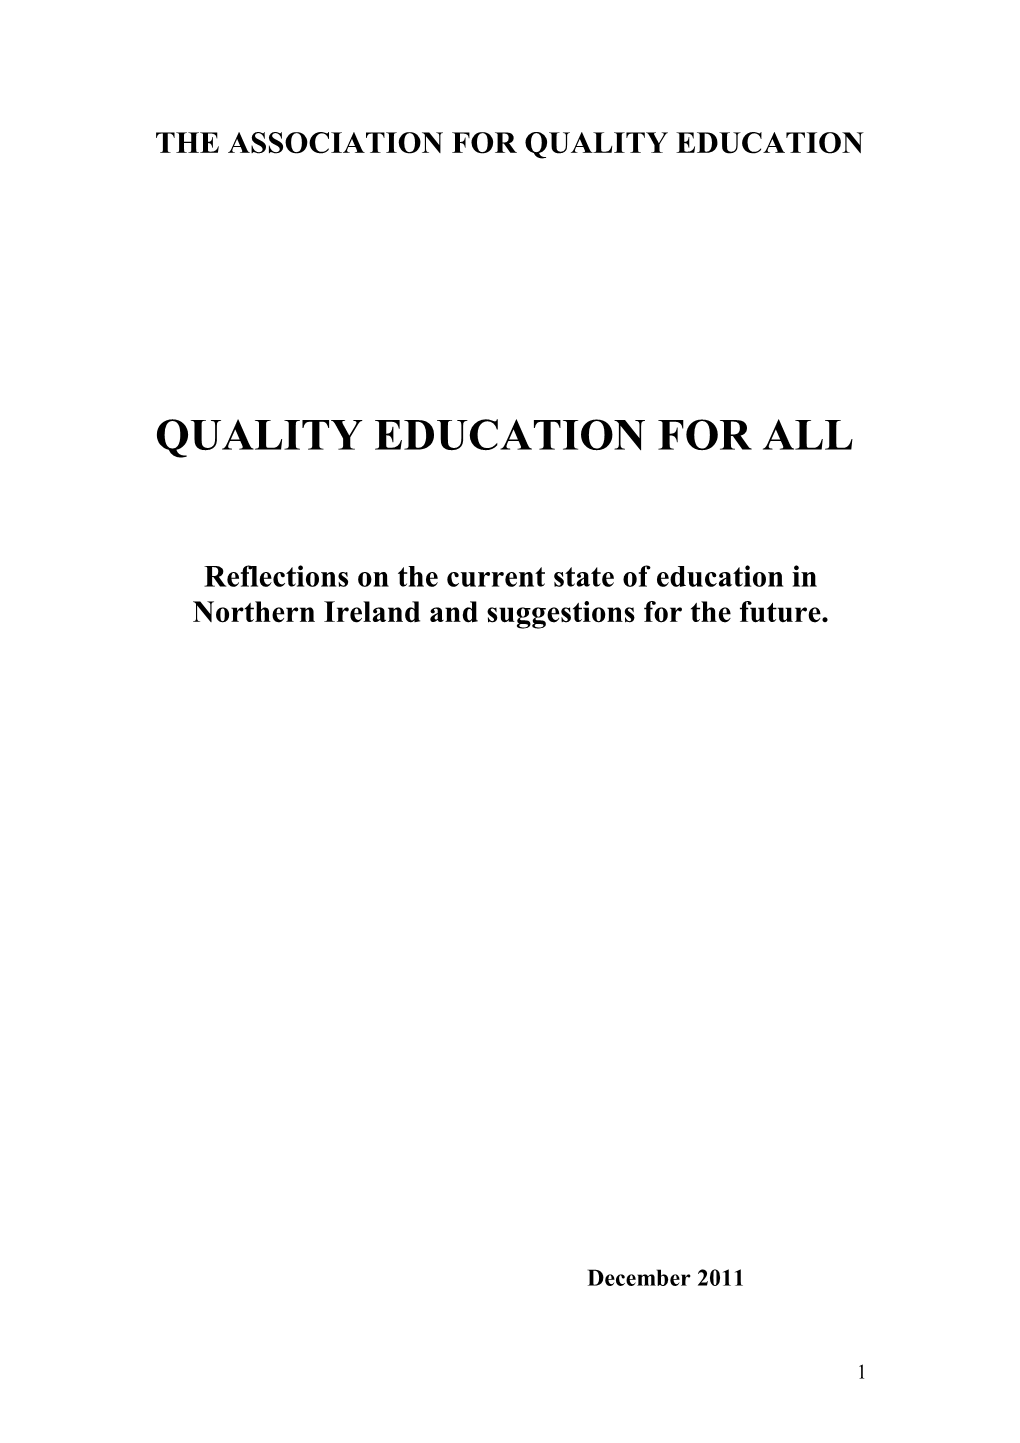 The Association for Quality Education